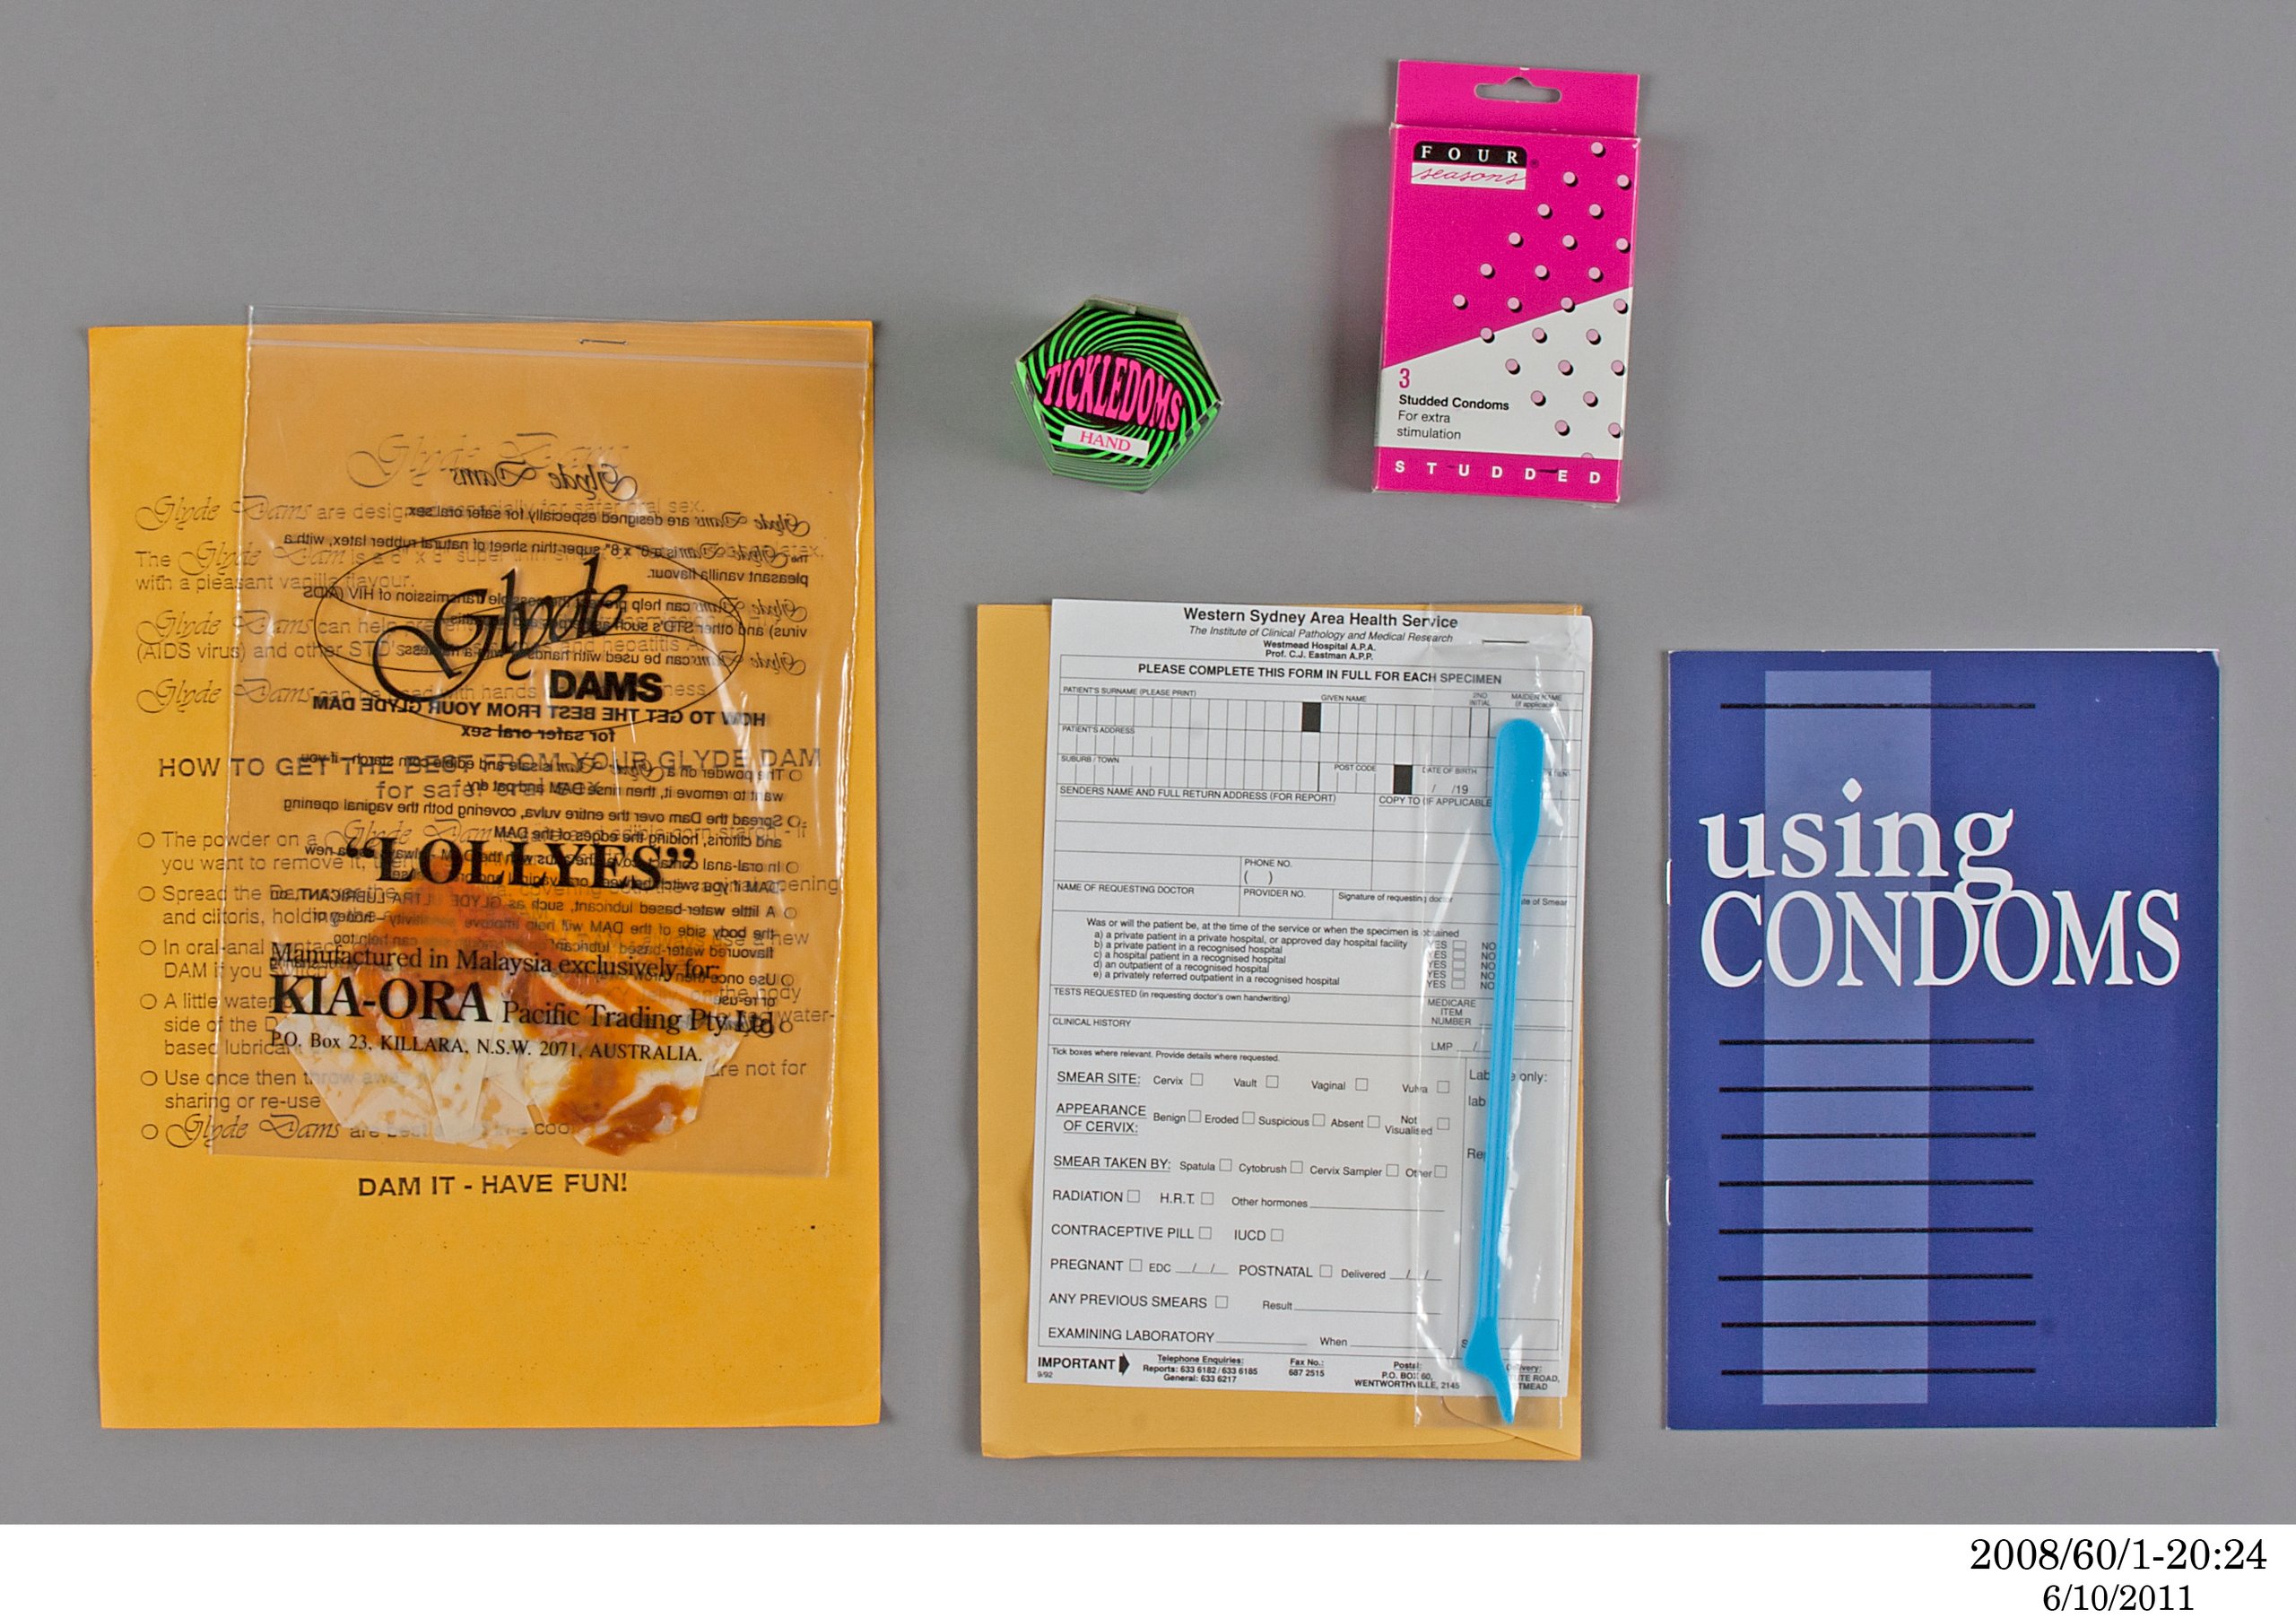 Contraceptive Teaching Kit made by The Family Planning Association of New South Wales